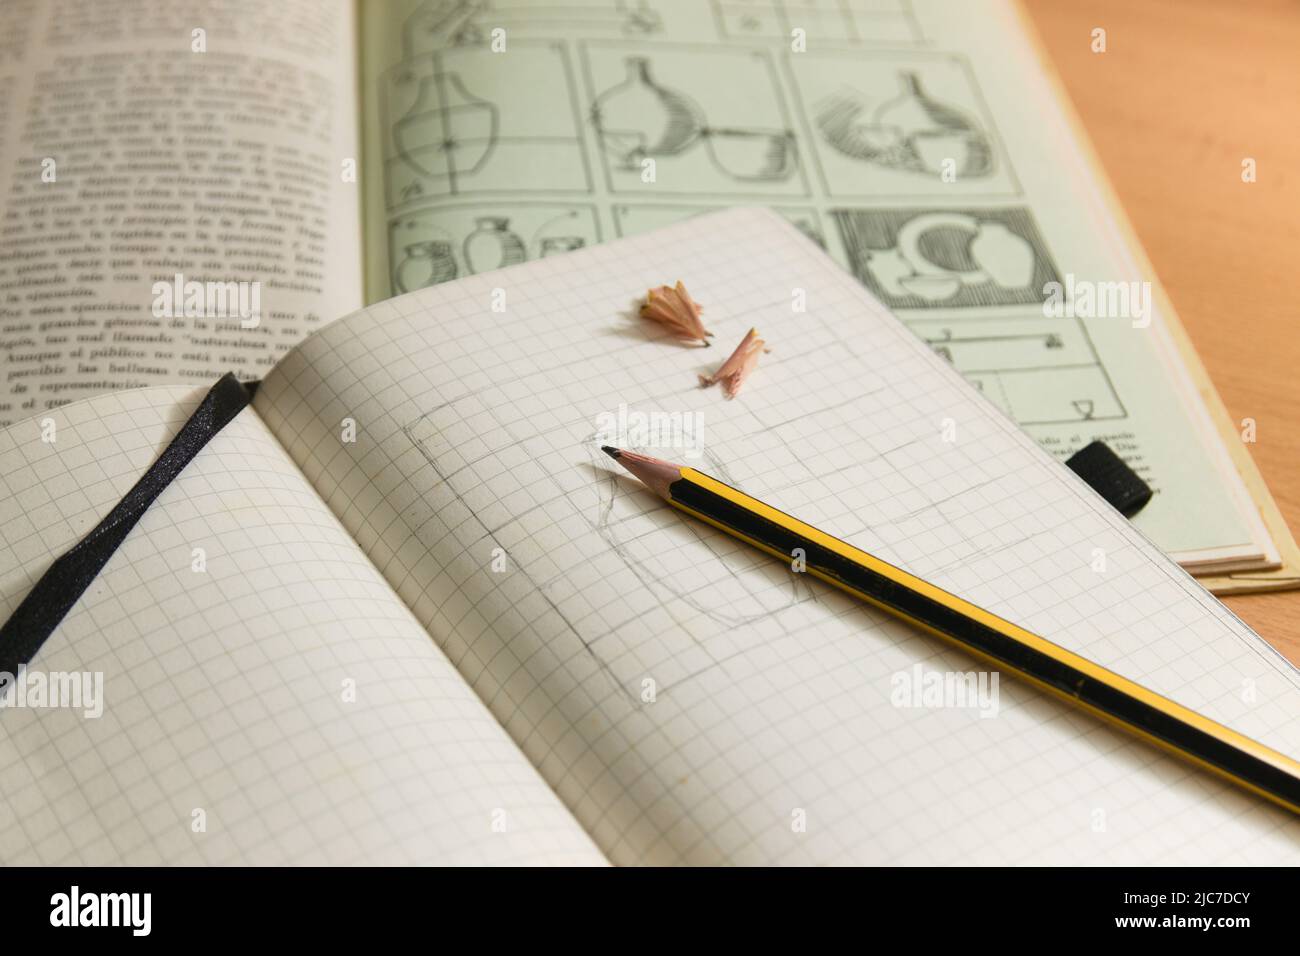 Close-up of a notepad on which someone has drawn a pencil sketch copied from the original shown in the background Stock Photo